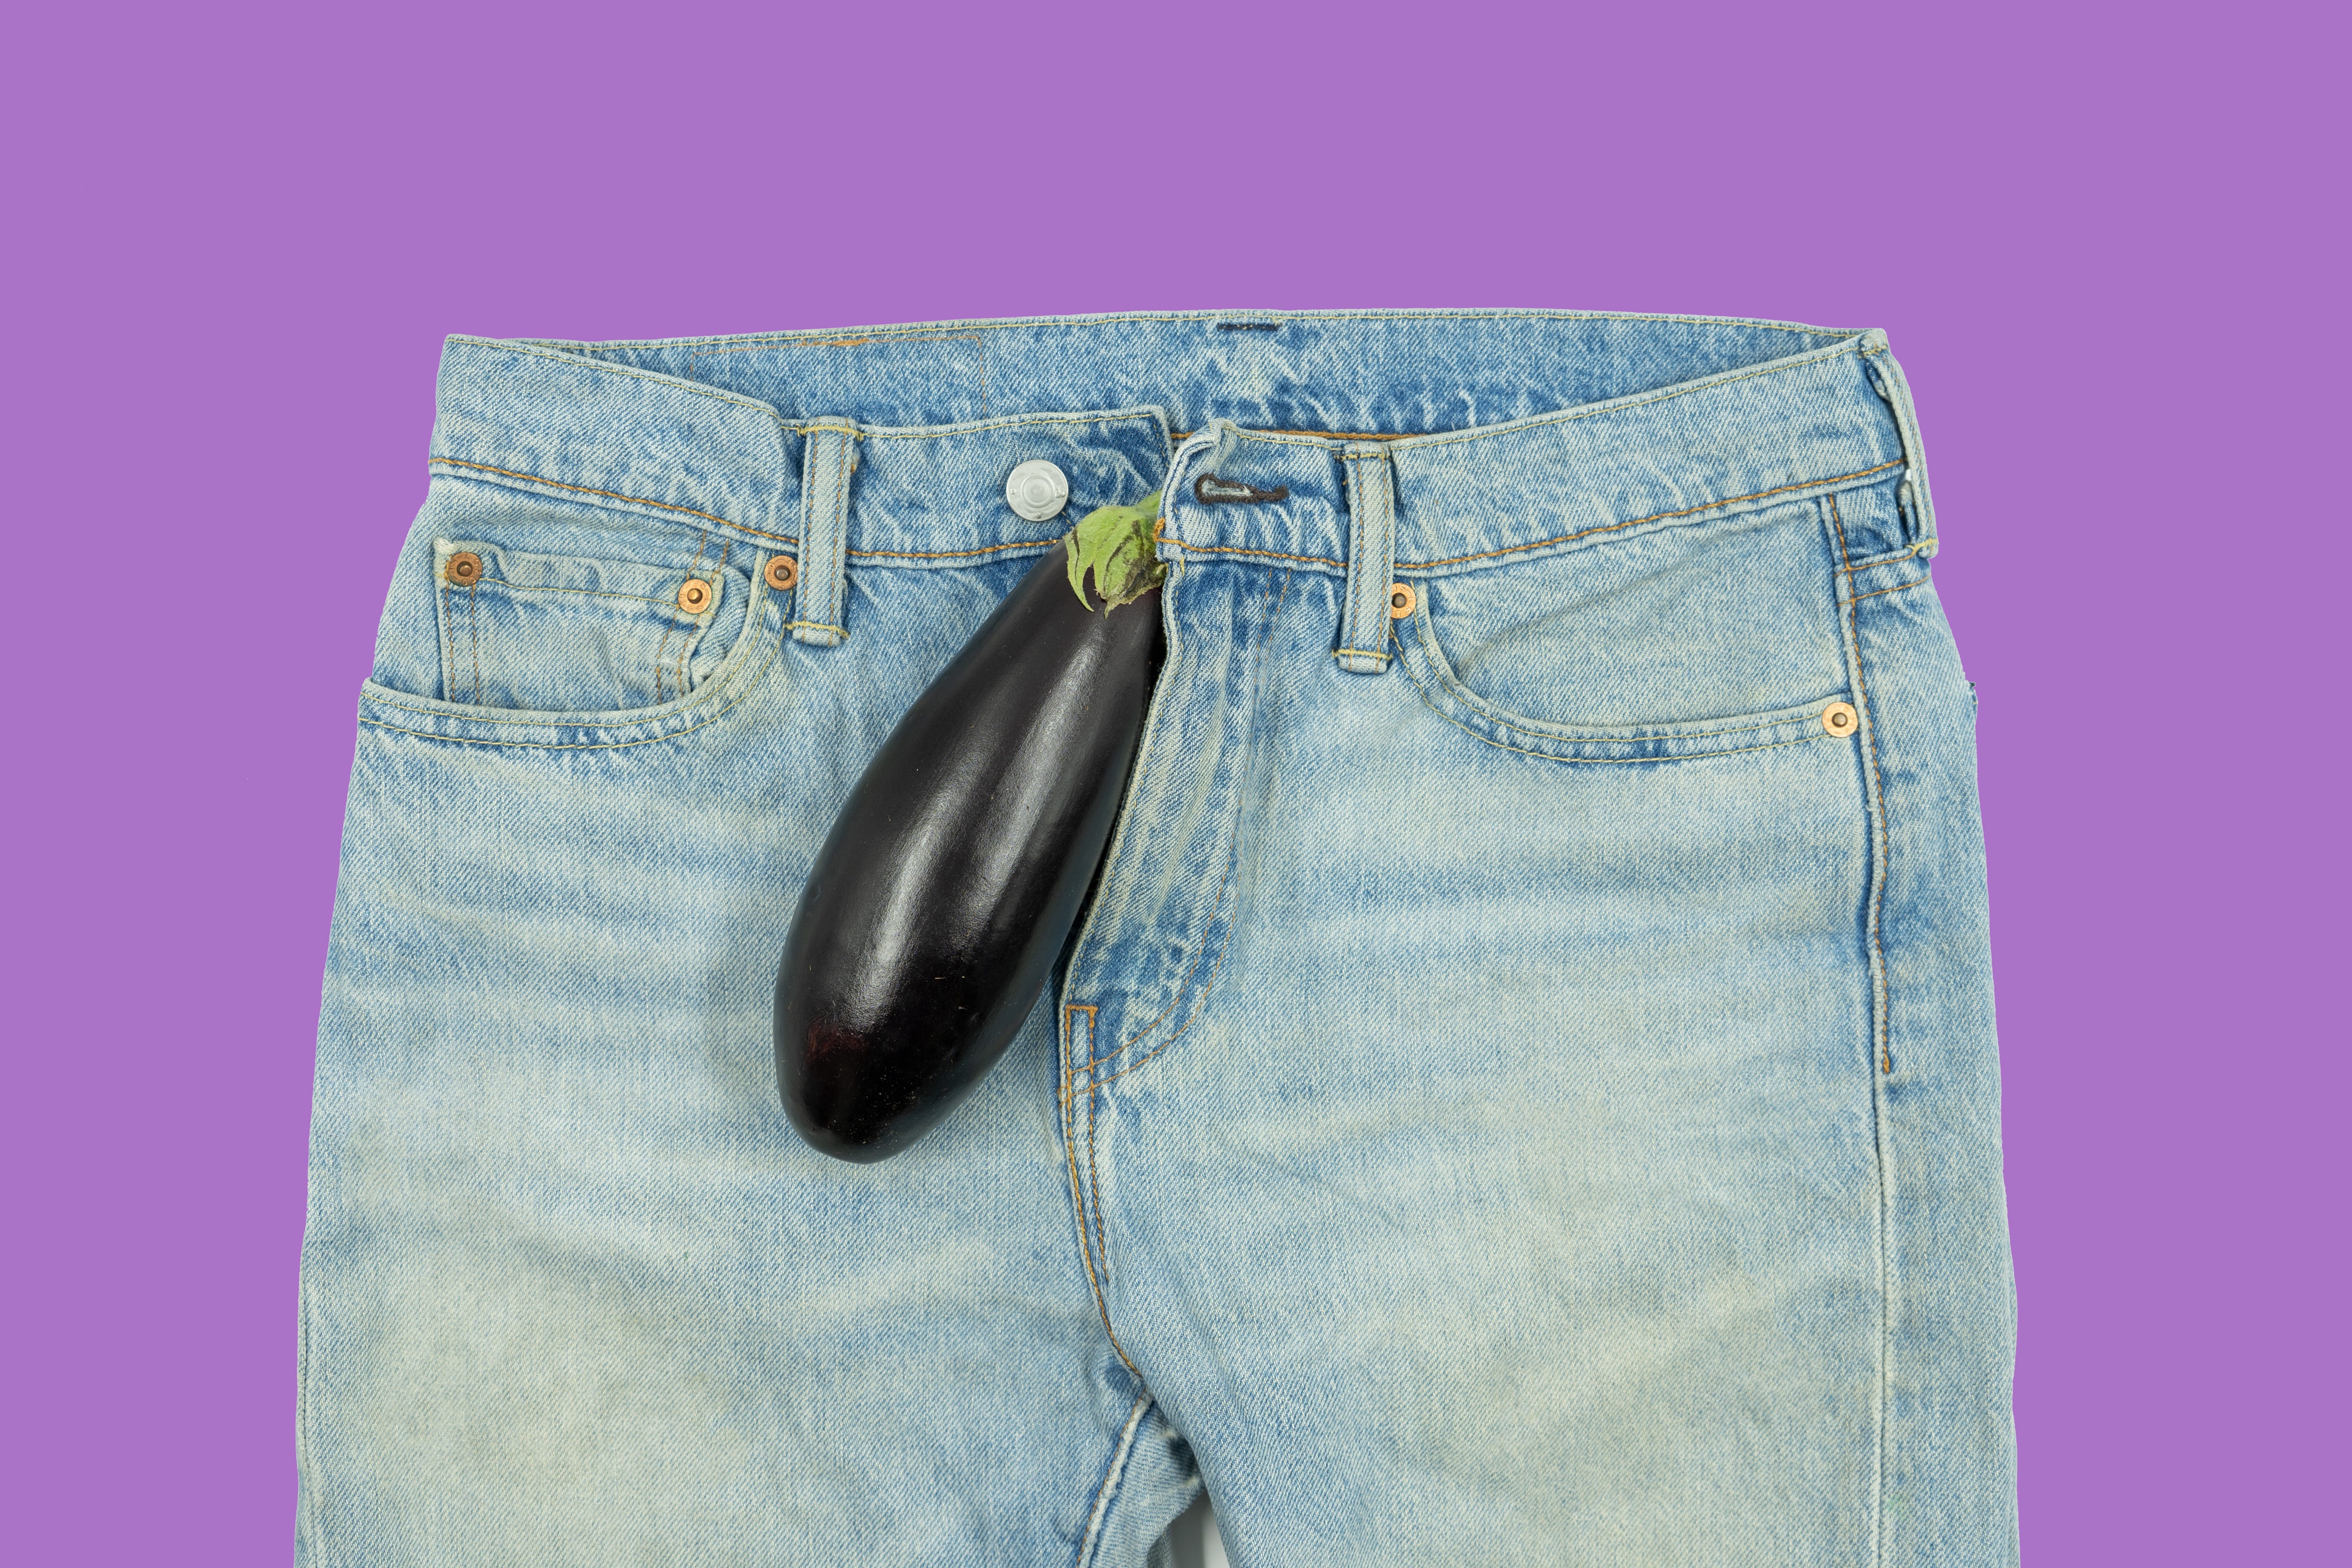 jeans and a eggplant as dick